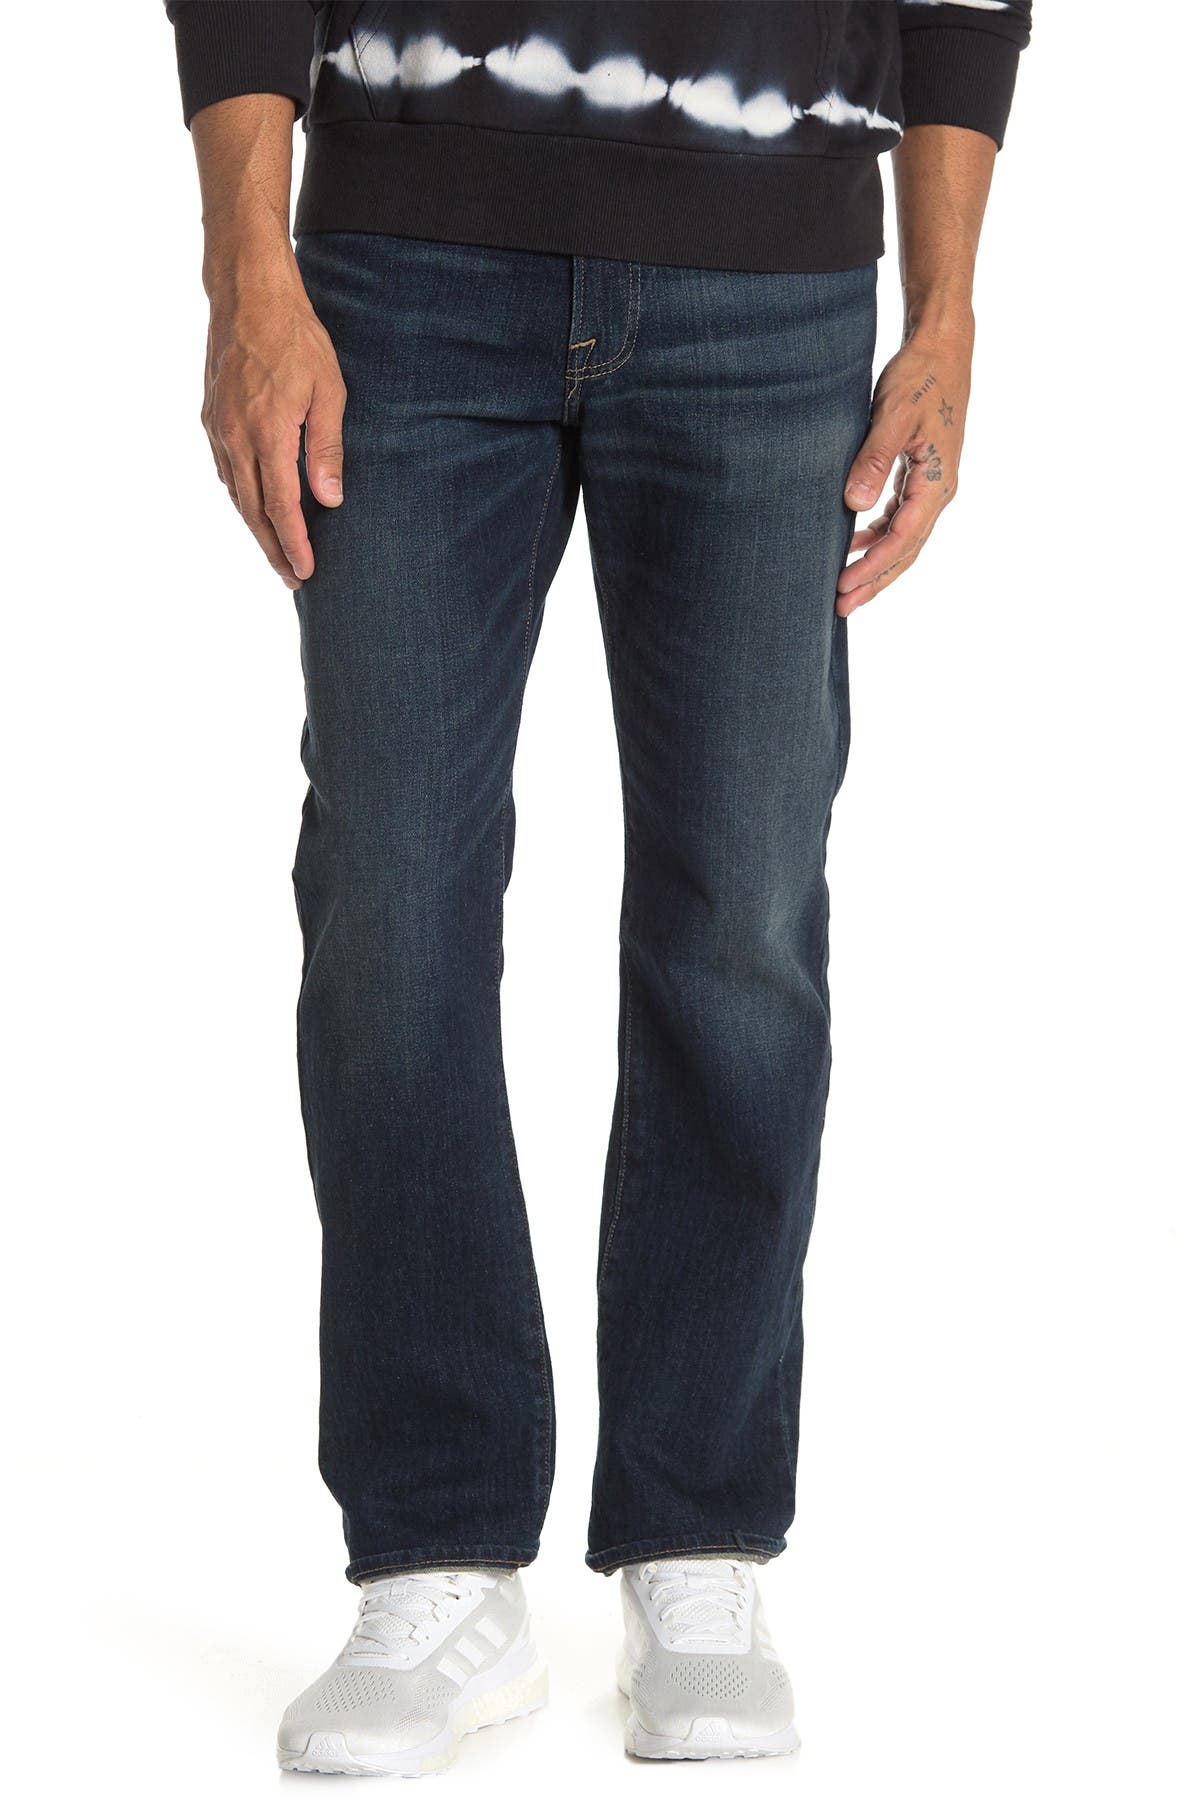 lucky brand 121 heritage slim fit pants